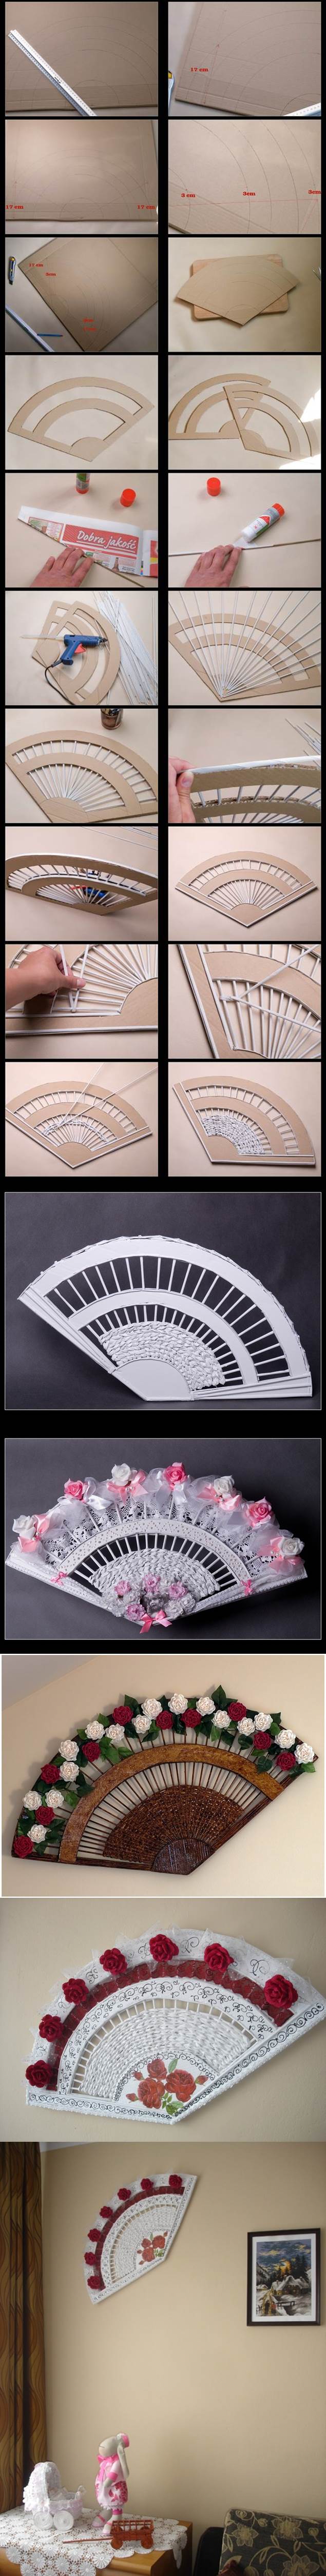 DIY Decorative Fan from Old Newspaper and Cardboard